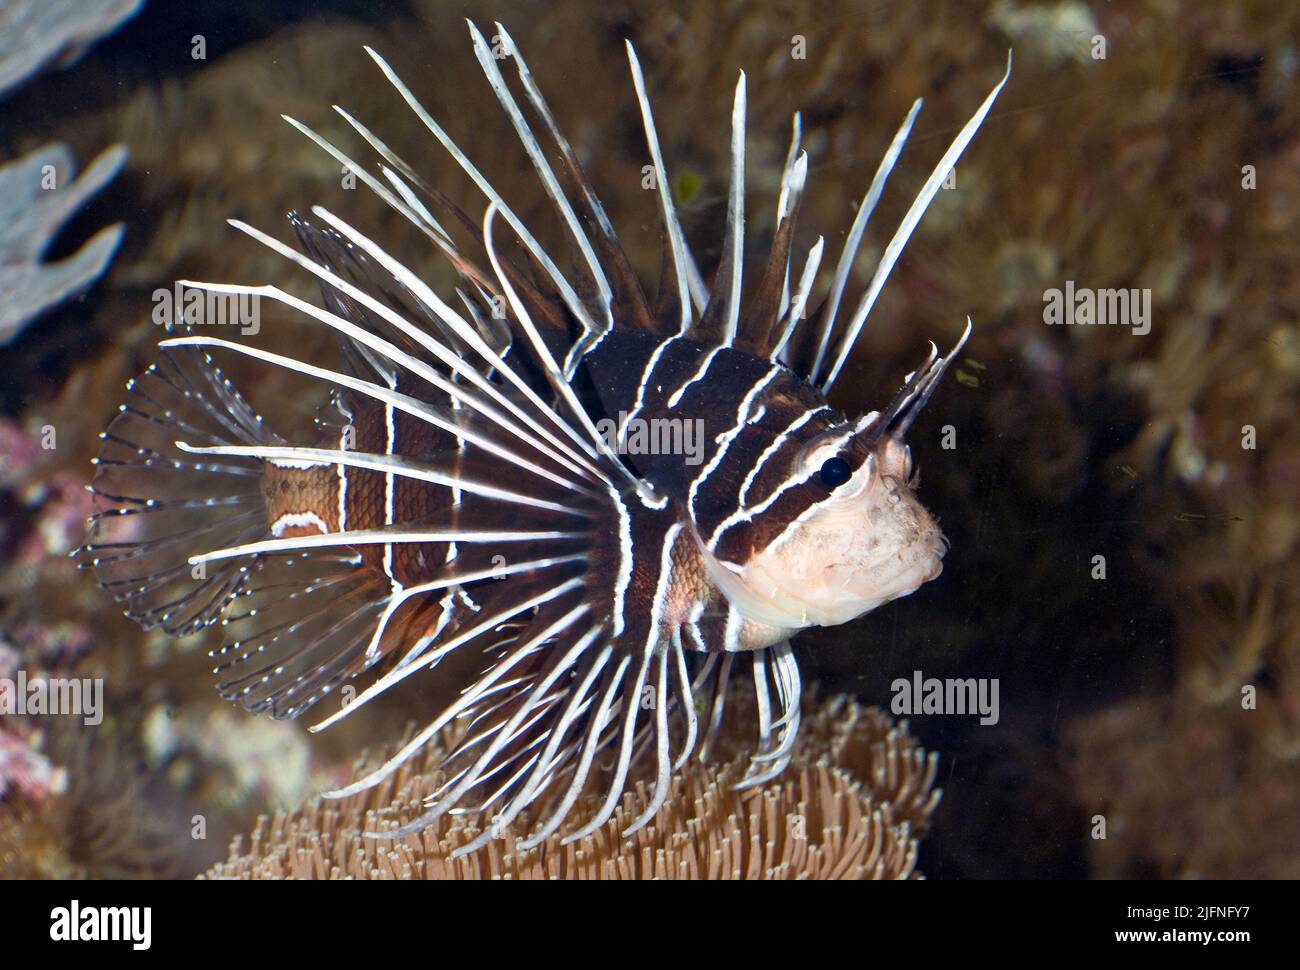 Clearfin Lionfish, Pterois radiata, from the Red Sea. Stock Photo